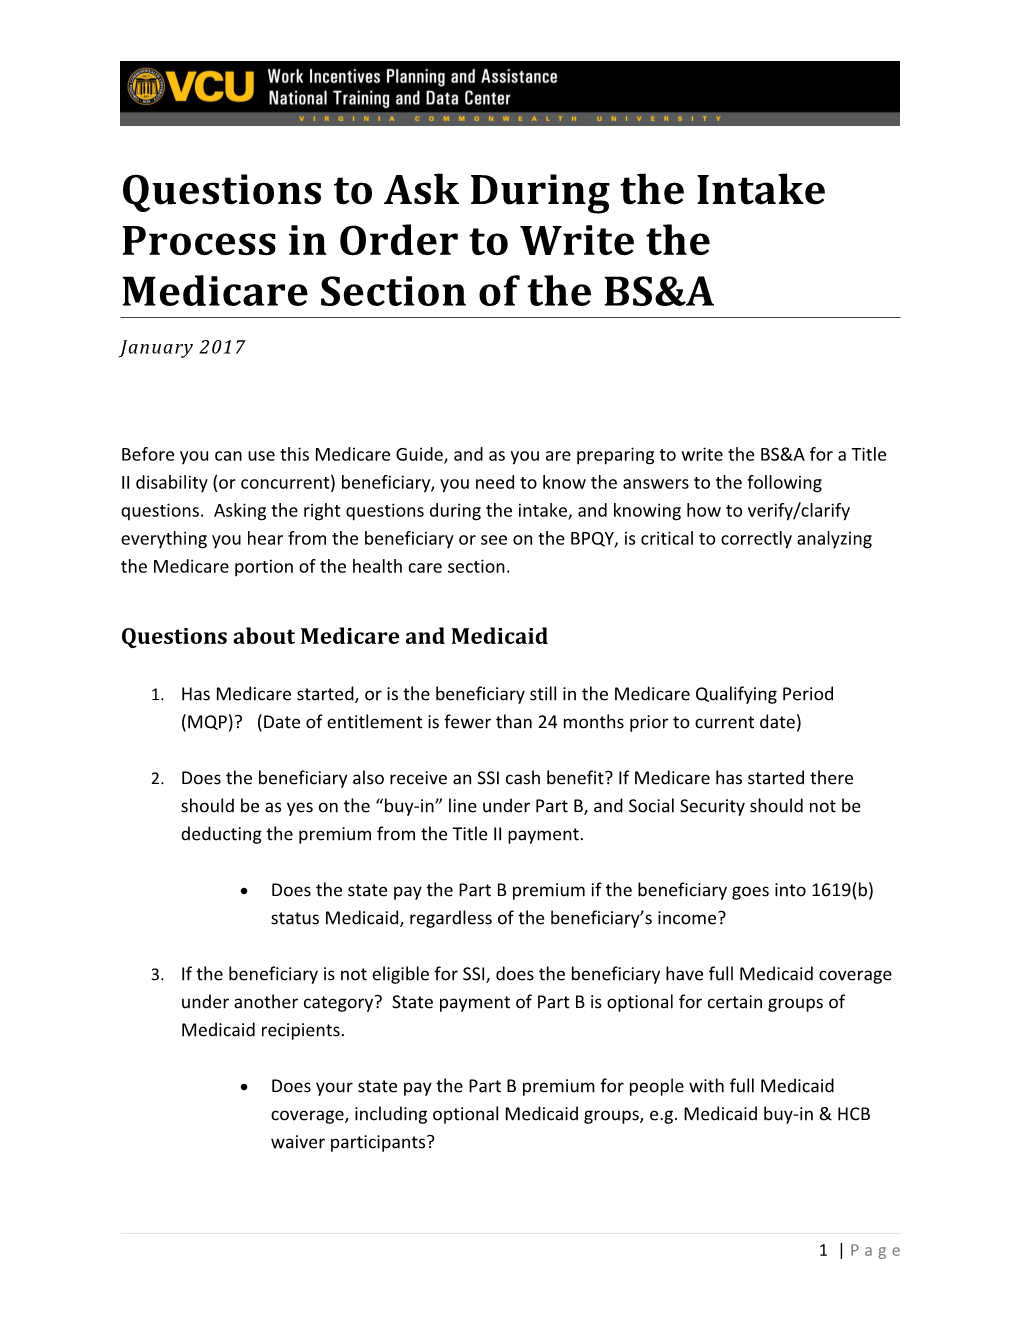 Questions to Ask to Fill out Medicare Section of BS&A